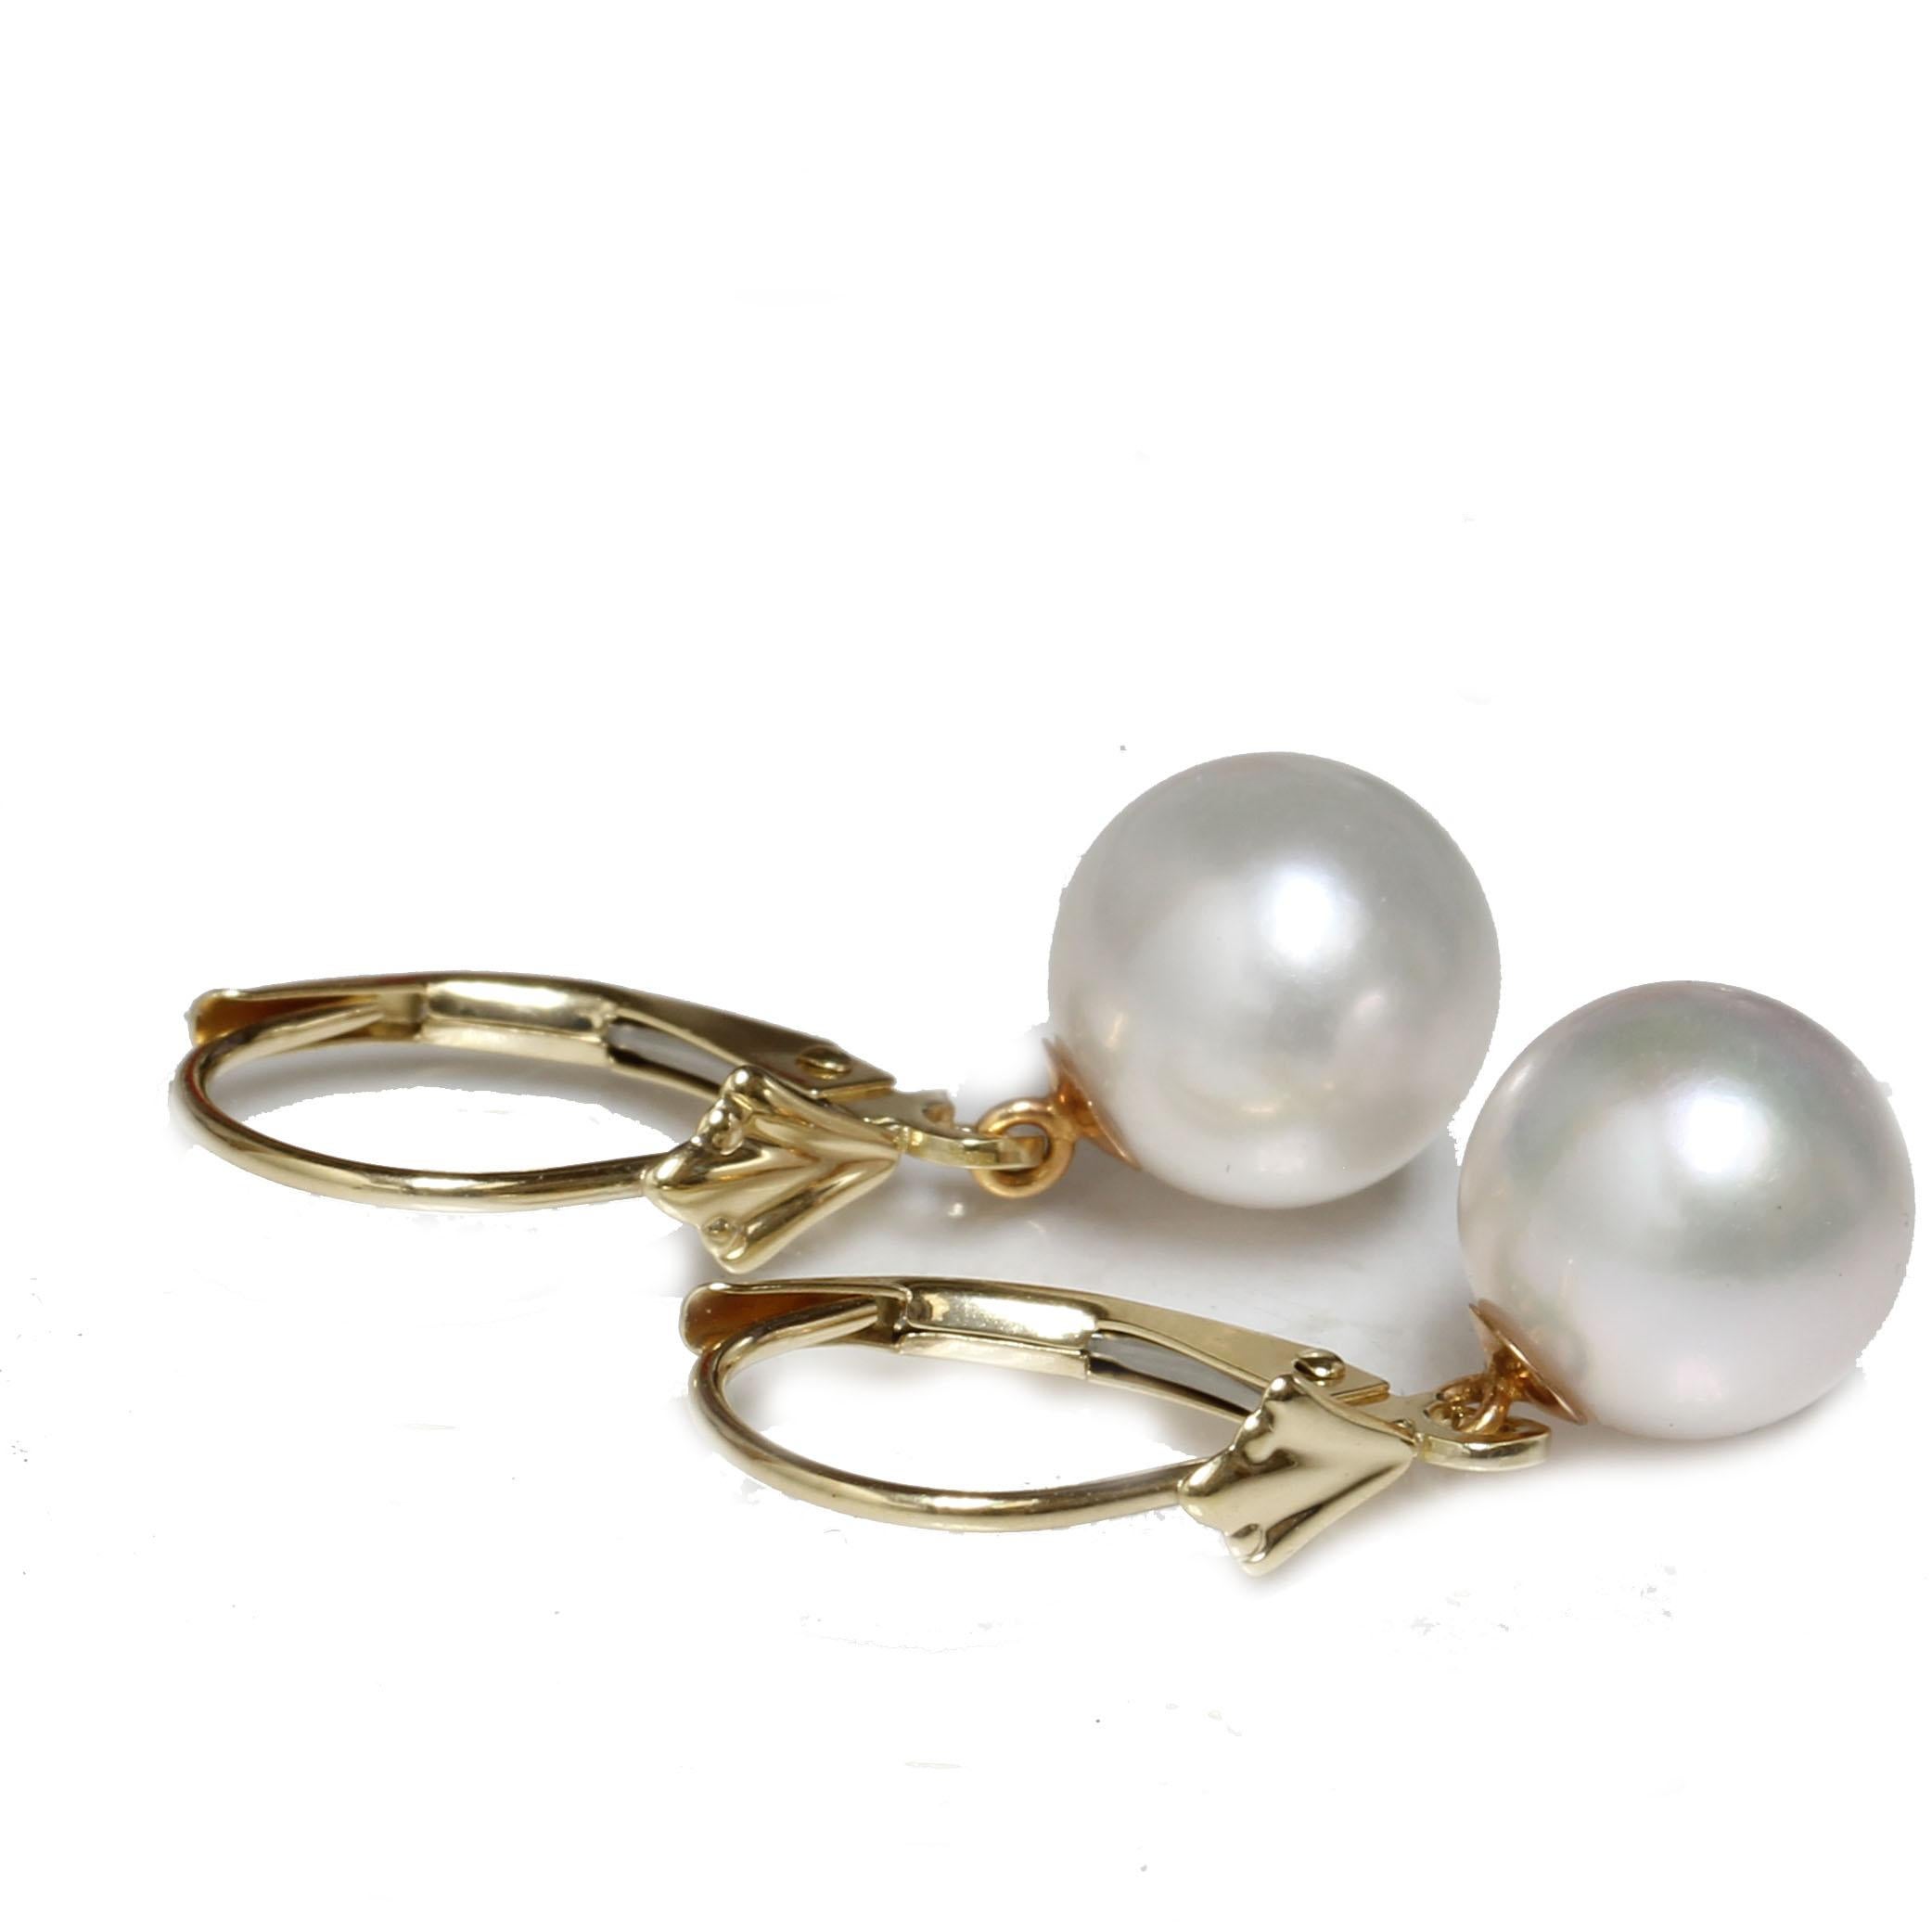 9.5 - 9mm AAA Flawless Japanese akoya cultured round white pearl fleur des lis lever-backs earrings. This pearl dangle earrings are set in 14k yellow gold. Fleur-de-lis earrings are popular choices for people who appreciate classic and elegant